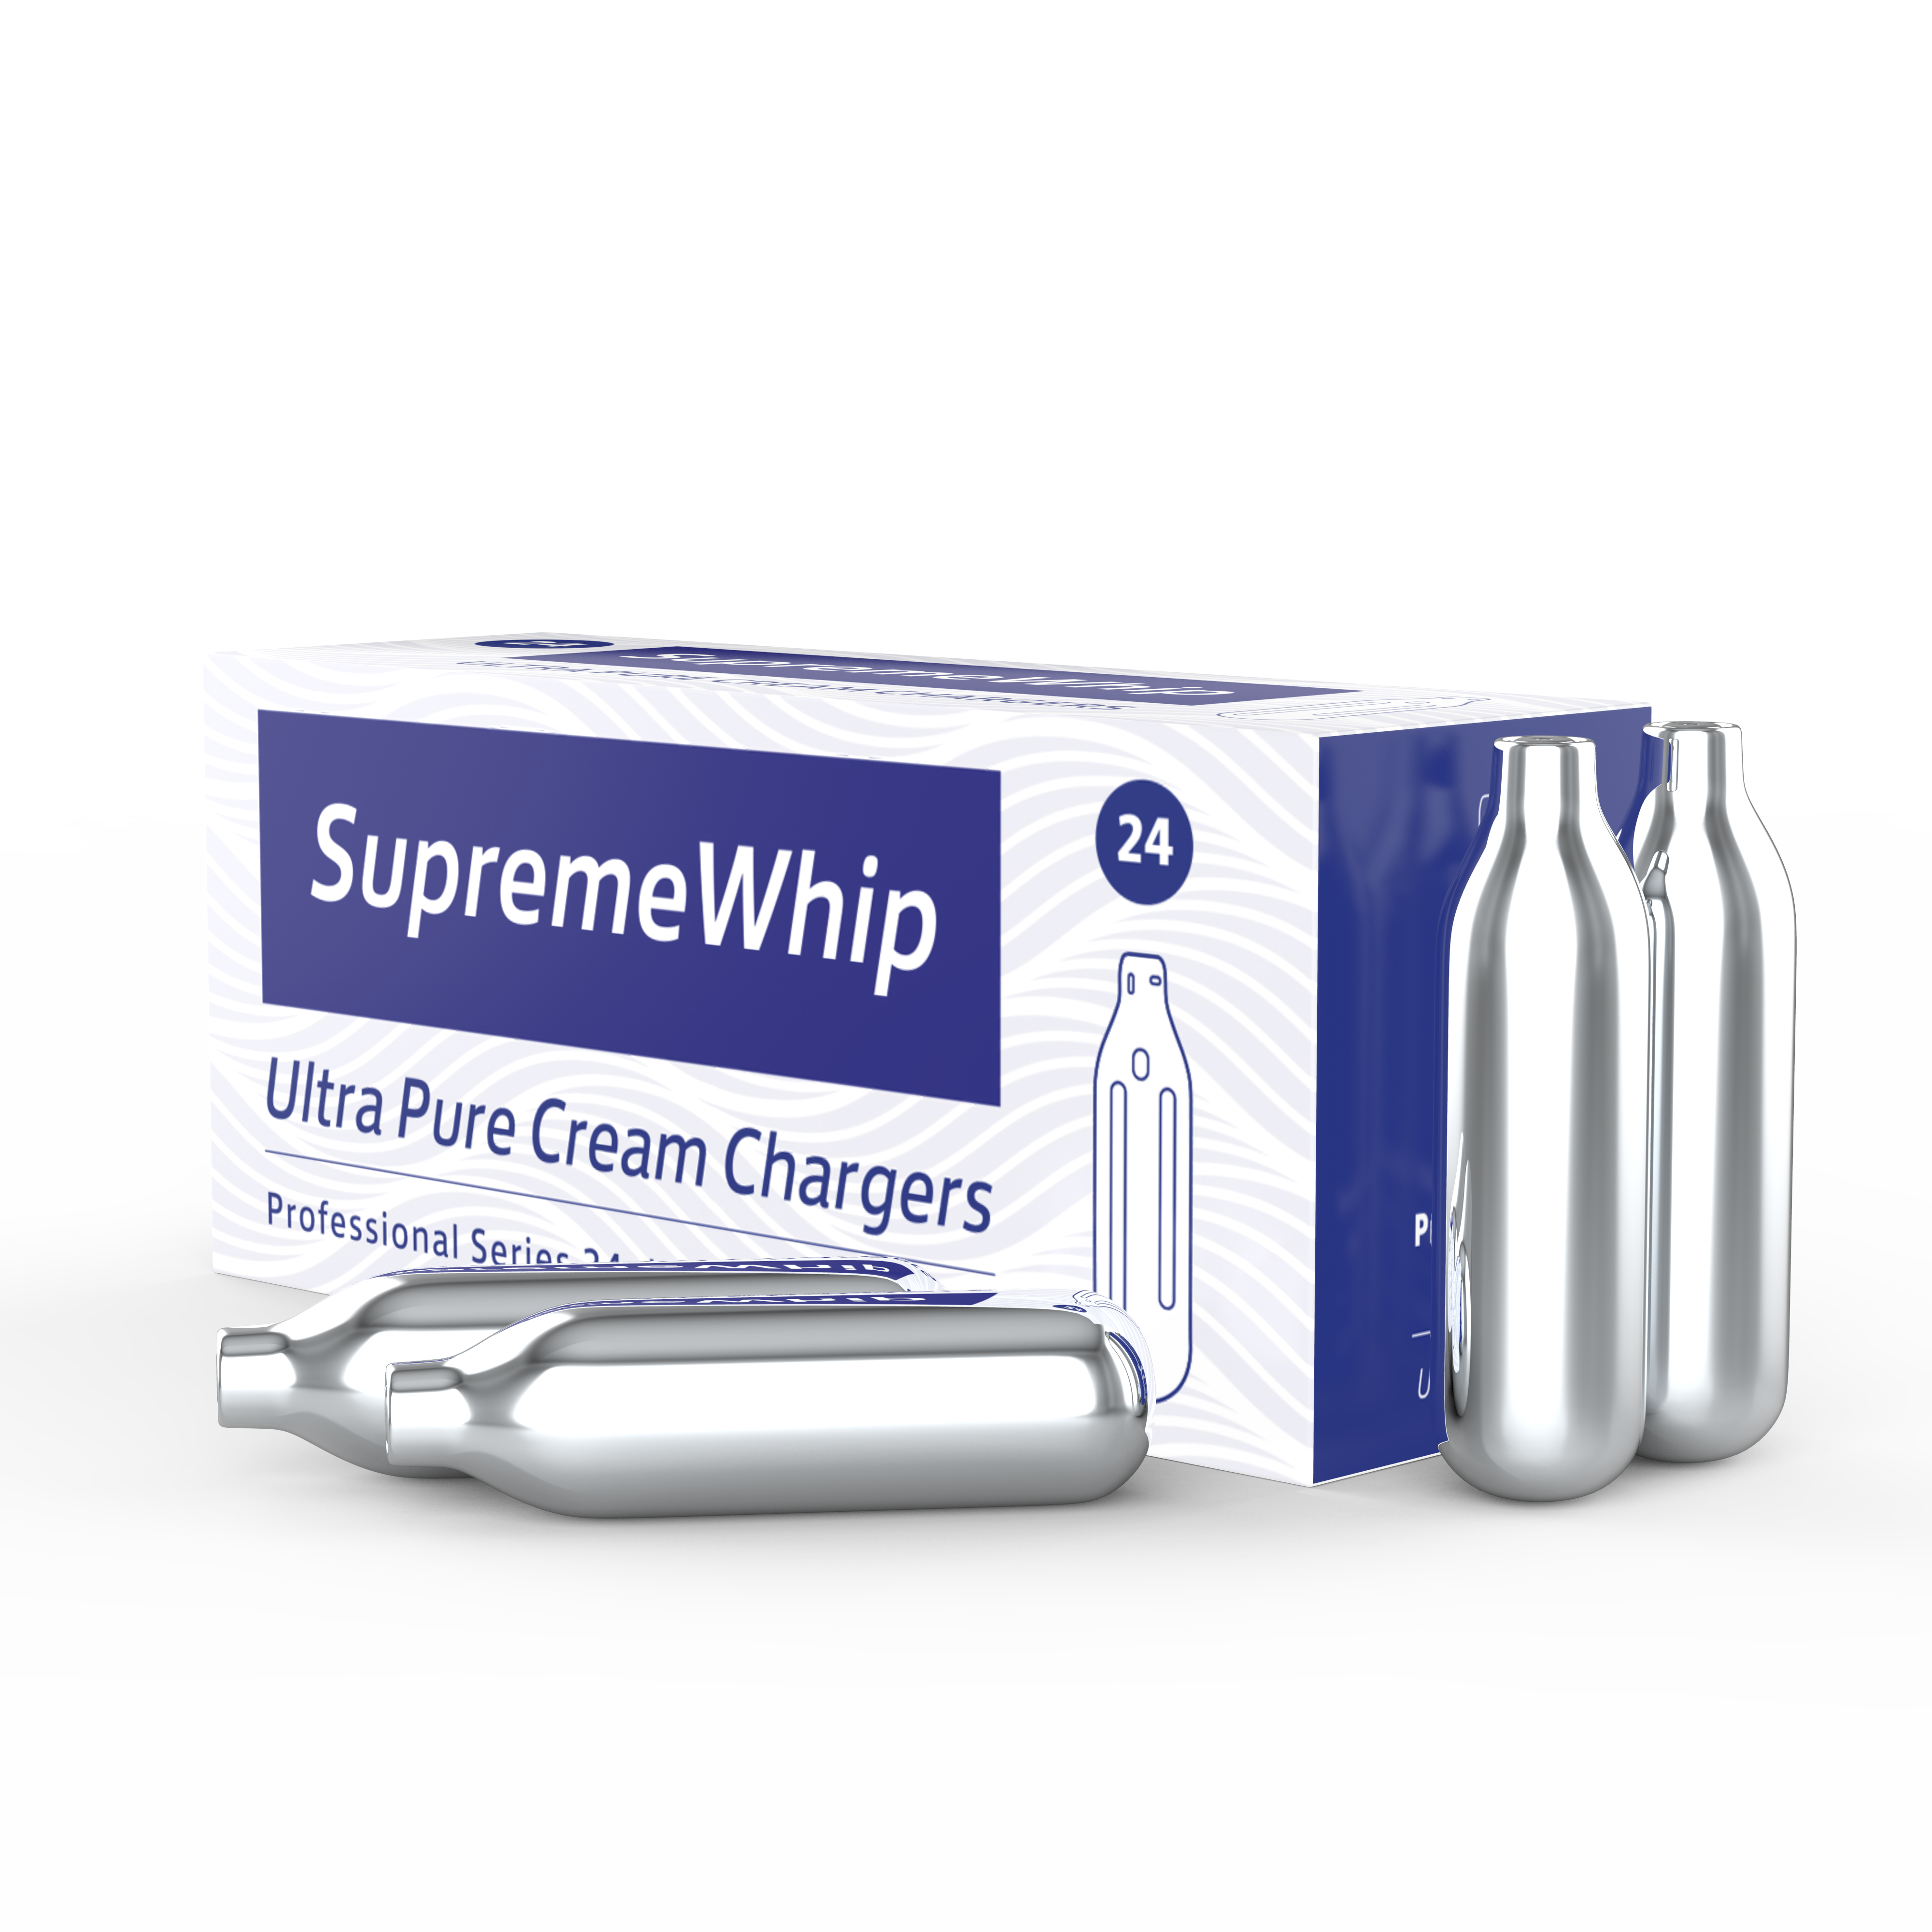 SupremeWhip Cream Chargers 8.2g in 24Pks - WHOLESALE